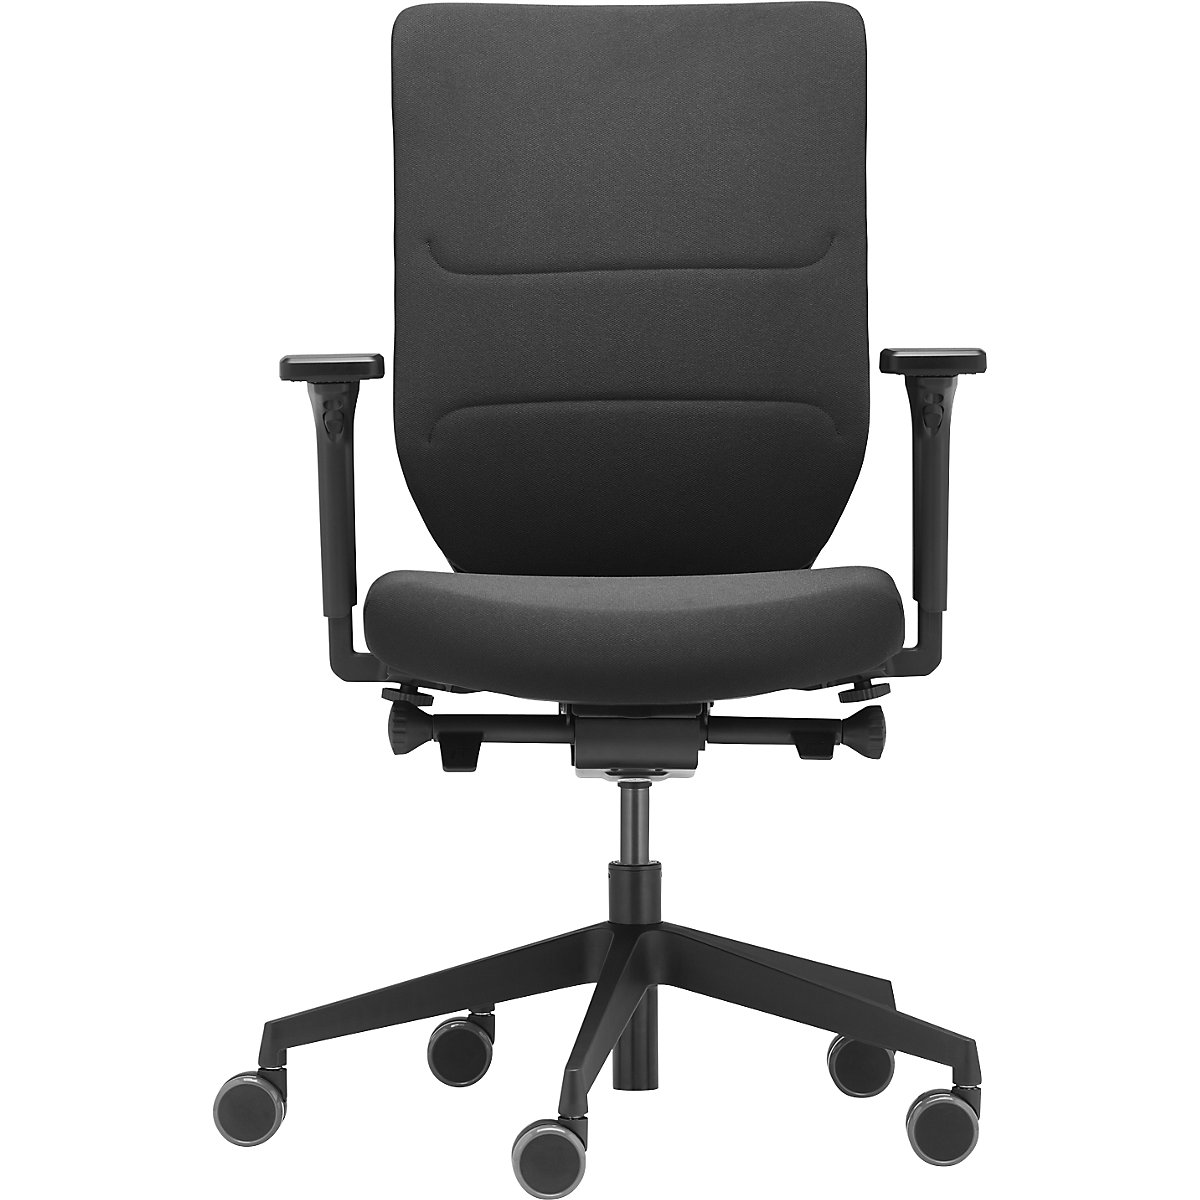 TO-SYNC COMFORT PRO TrendOffice office swivel chair